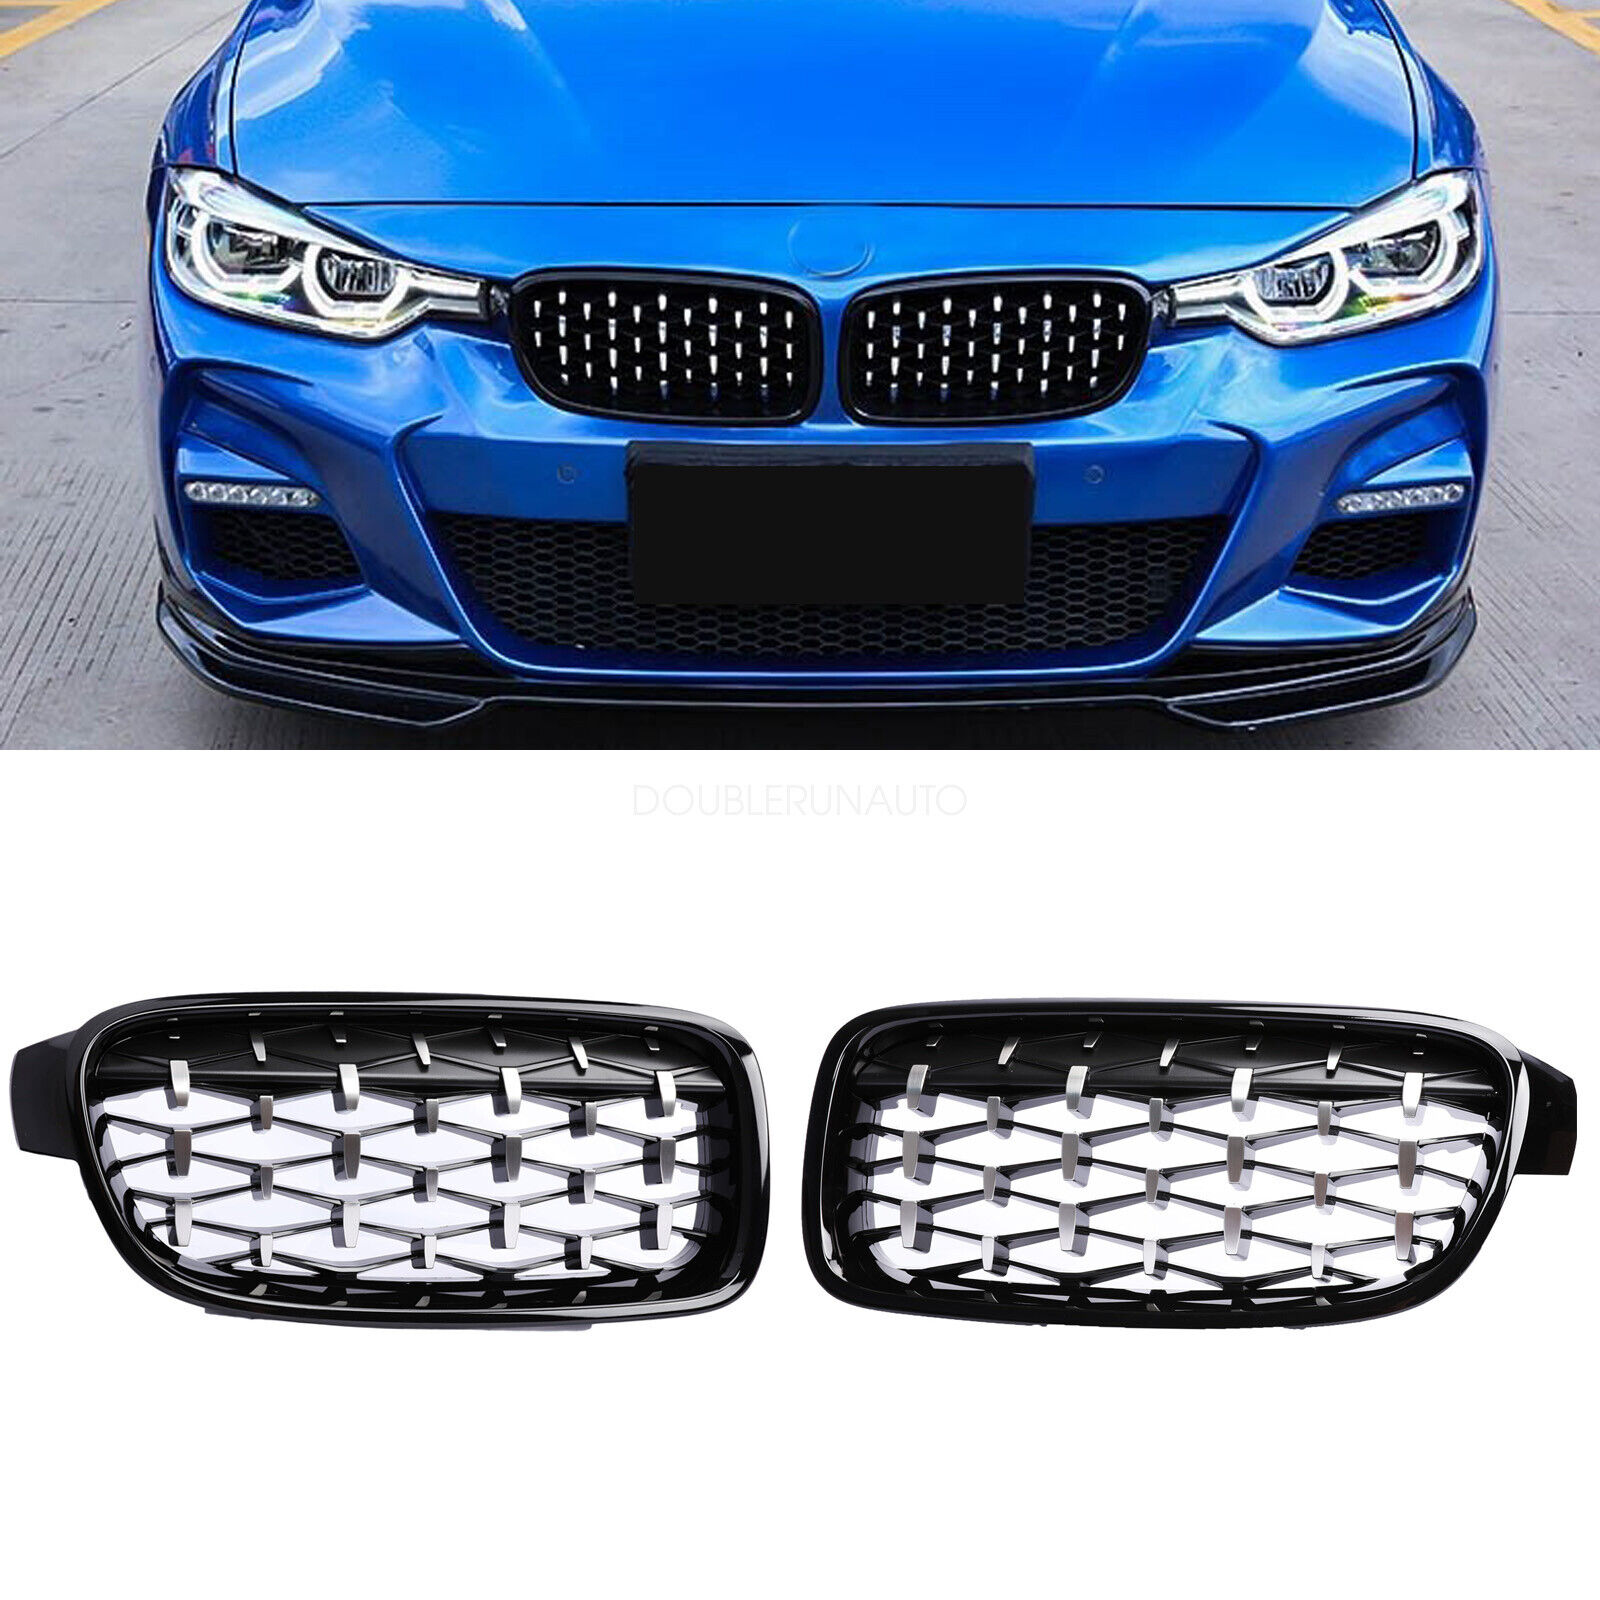 Gloss Black Front Diamond Kidney Grille Grills for BMW F30 328i 335i 2012-2018